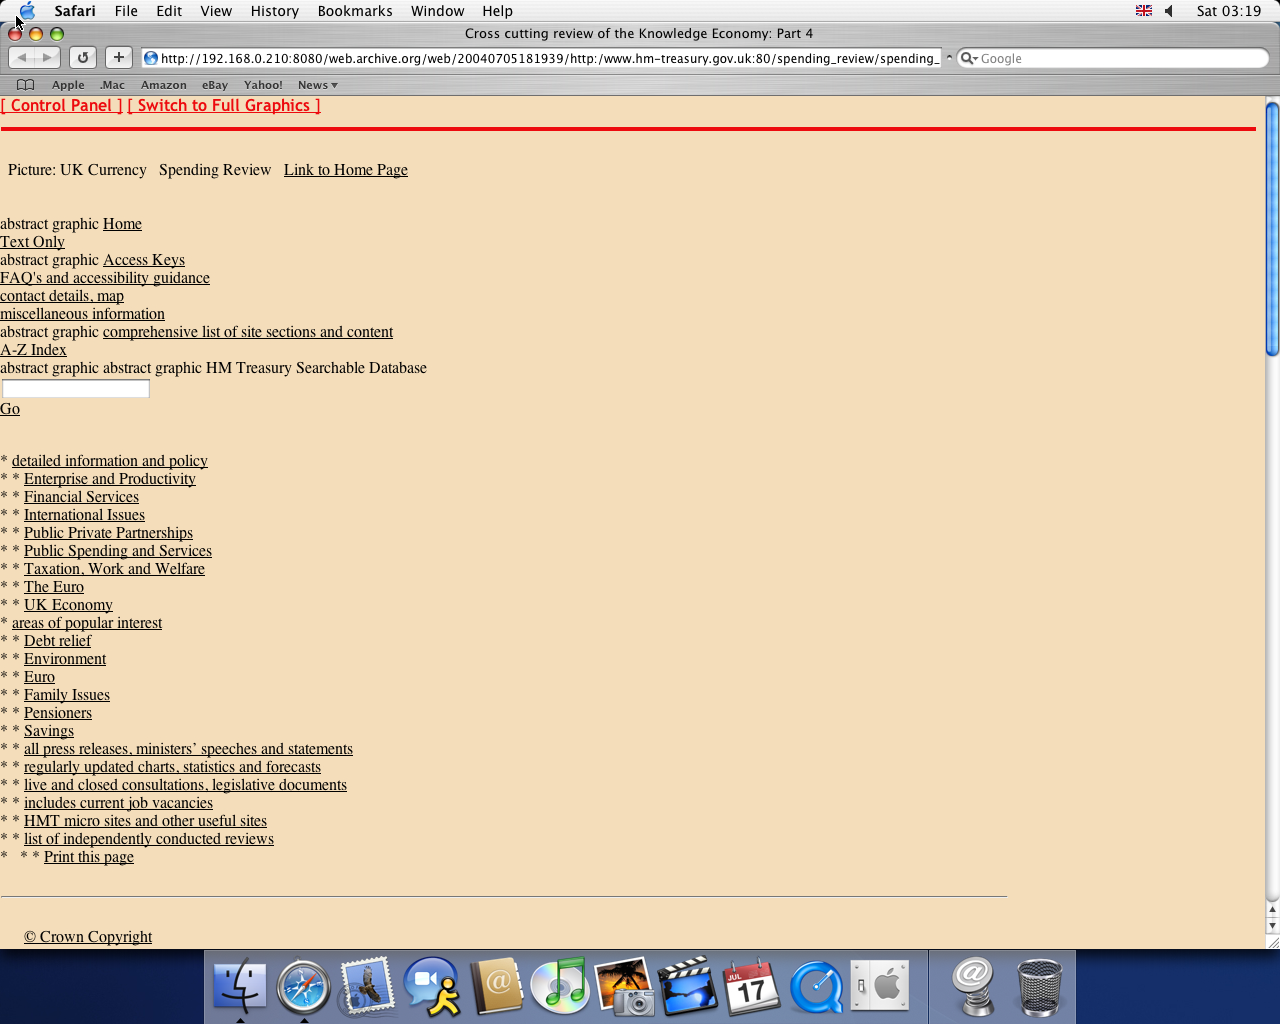 OS X 10.3 PPC with Safari 1.1 displaying a page from Her Majesty's Treasury archived at July 05, 2004 at 18:19:39